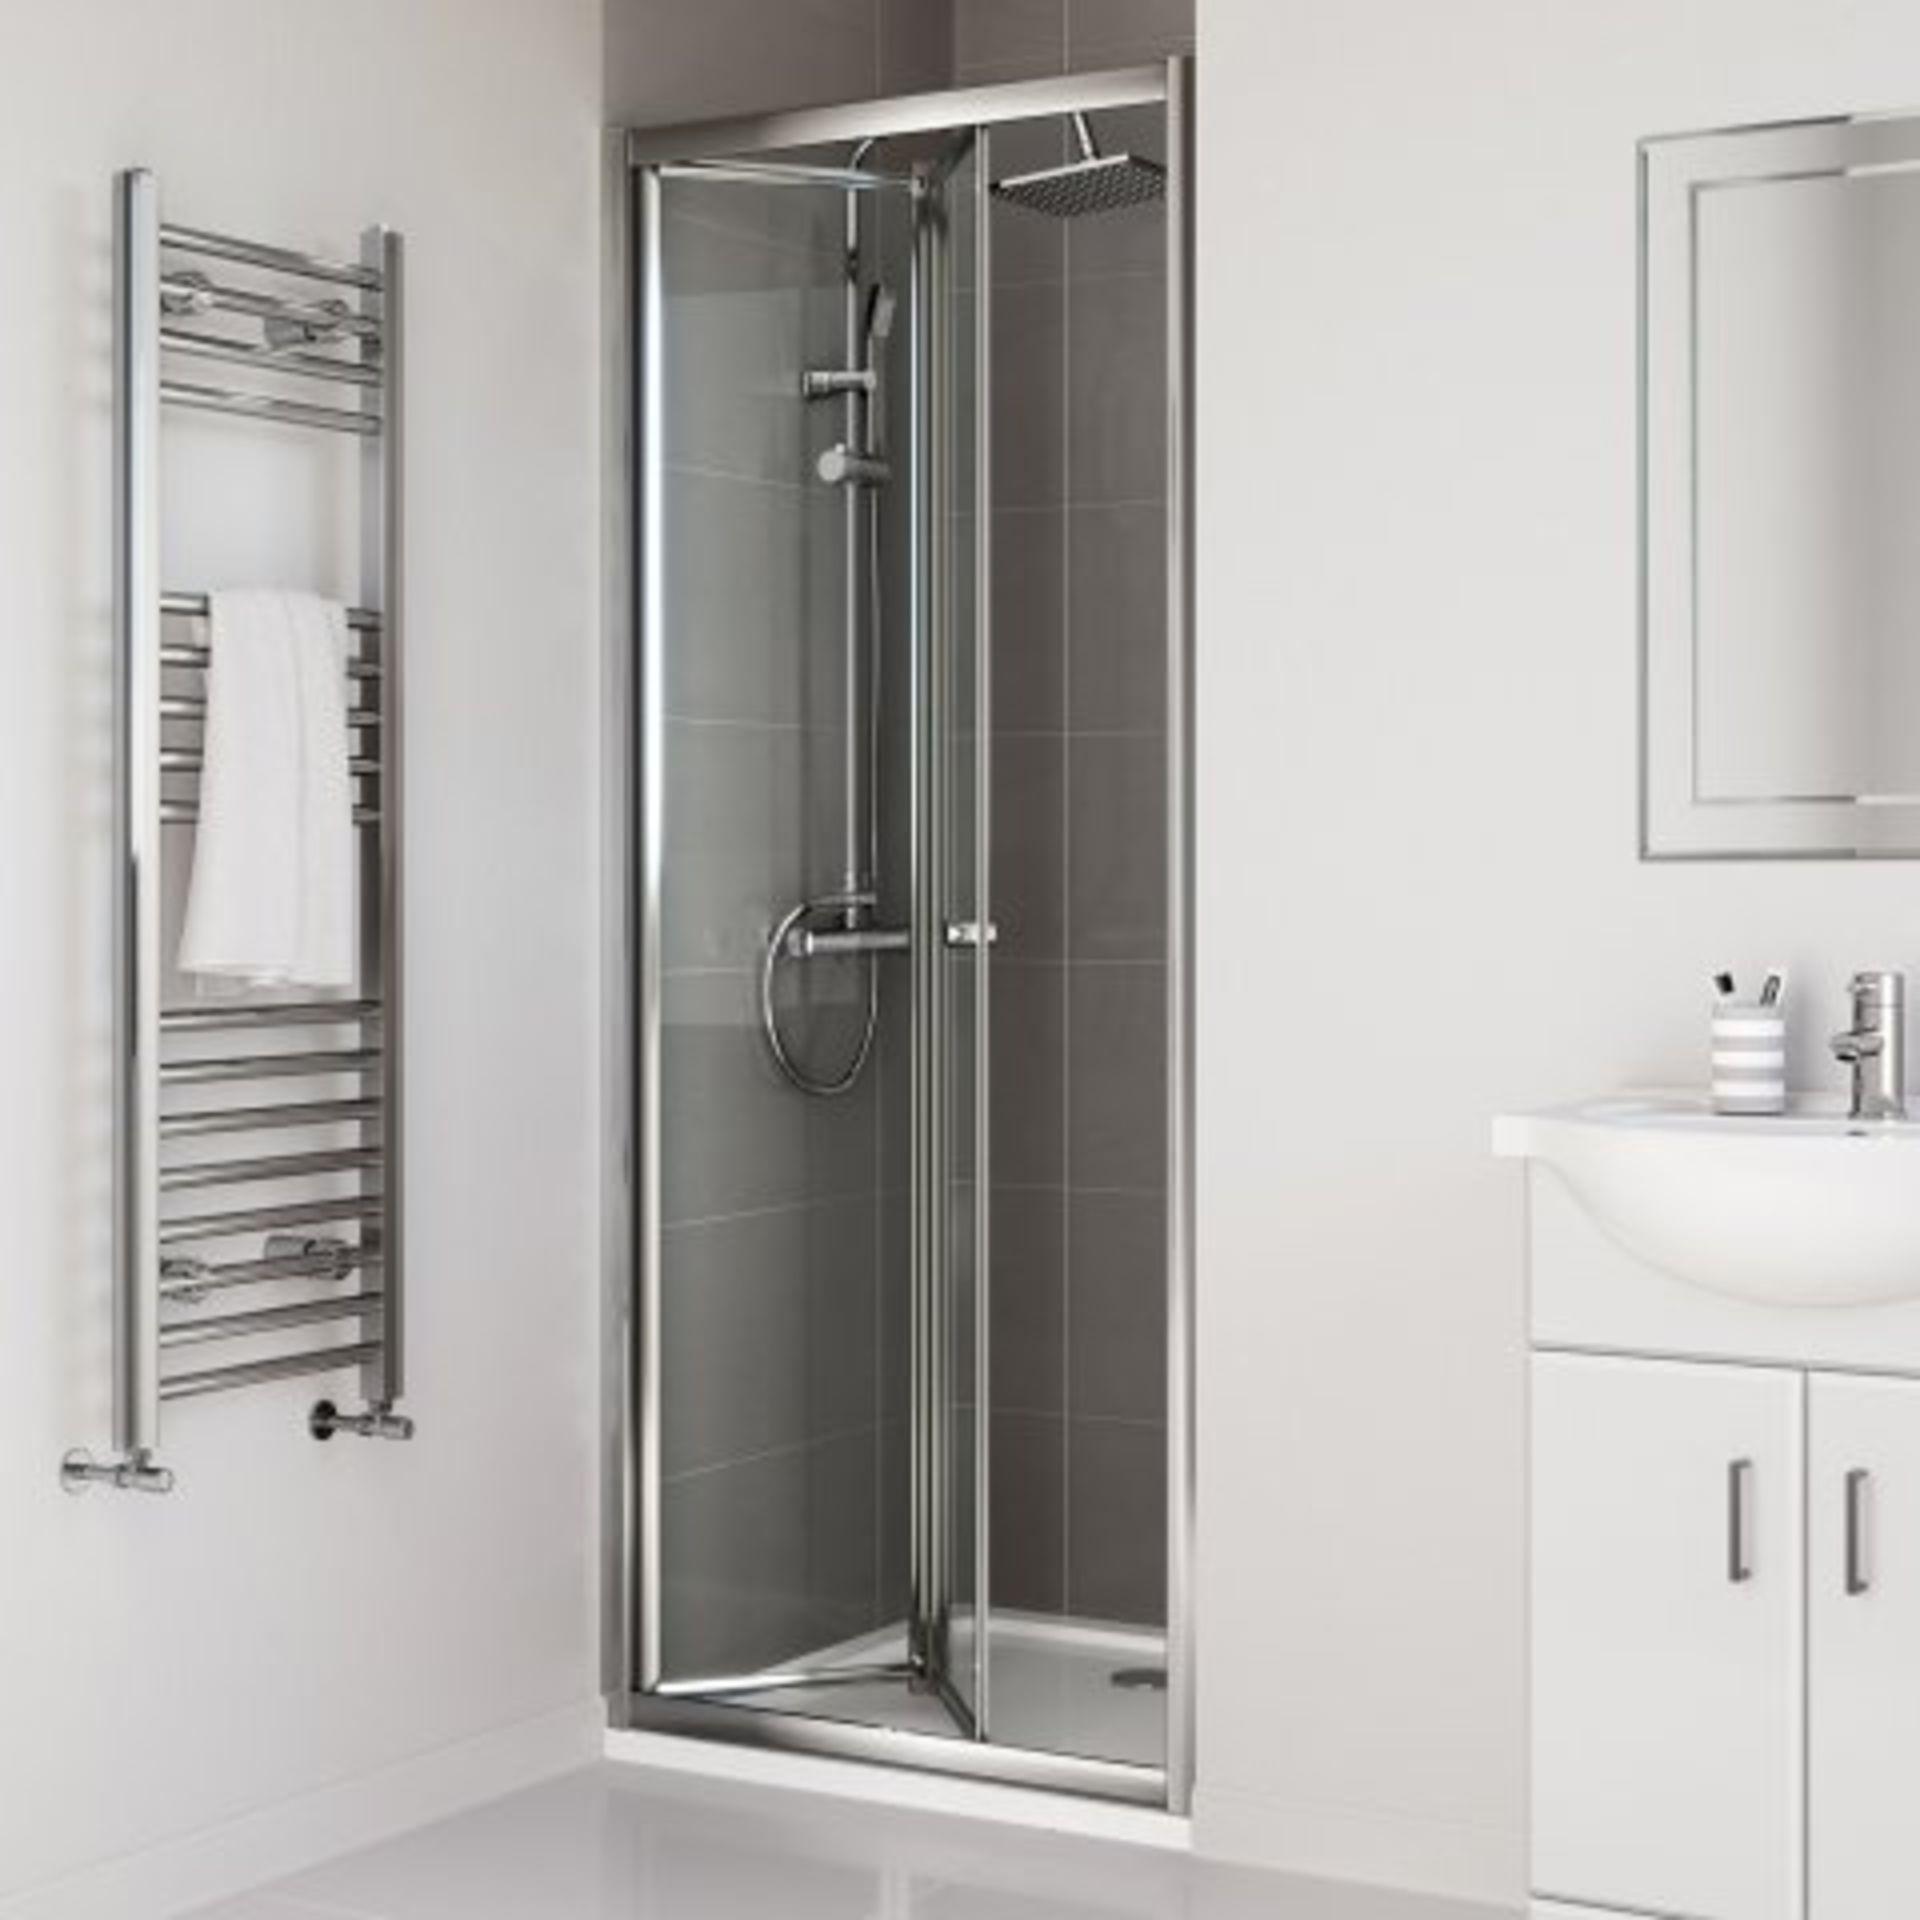 (I19) 760mm - Elements Bi Fold Shower Door RRP £299.99 Do you have an awkward nook or a tricky - Bild 2 aus 3